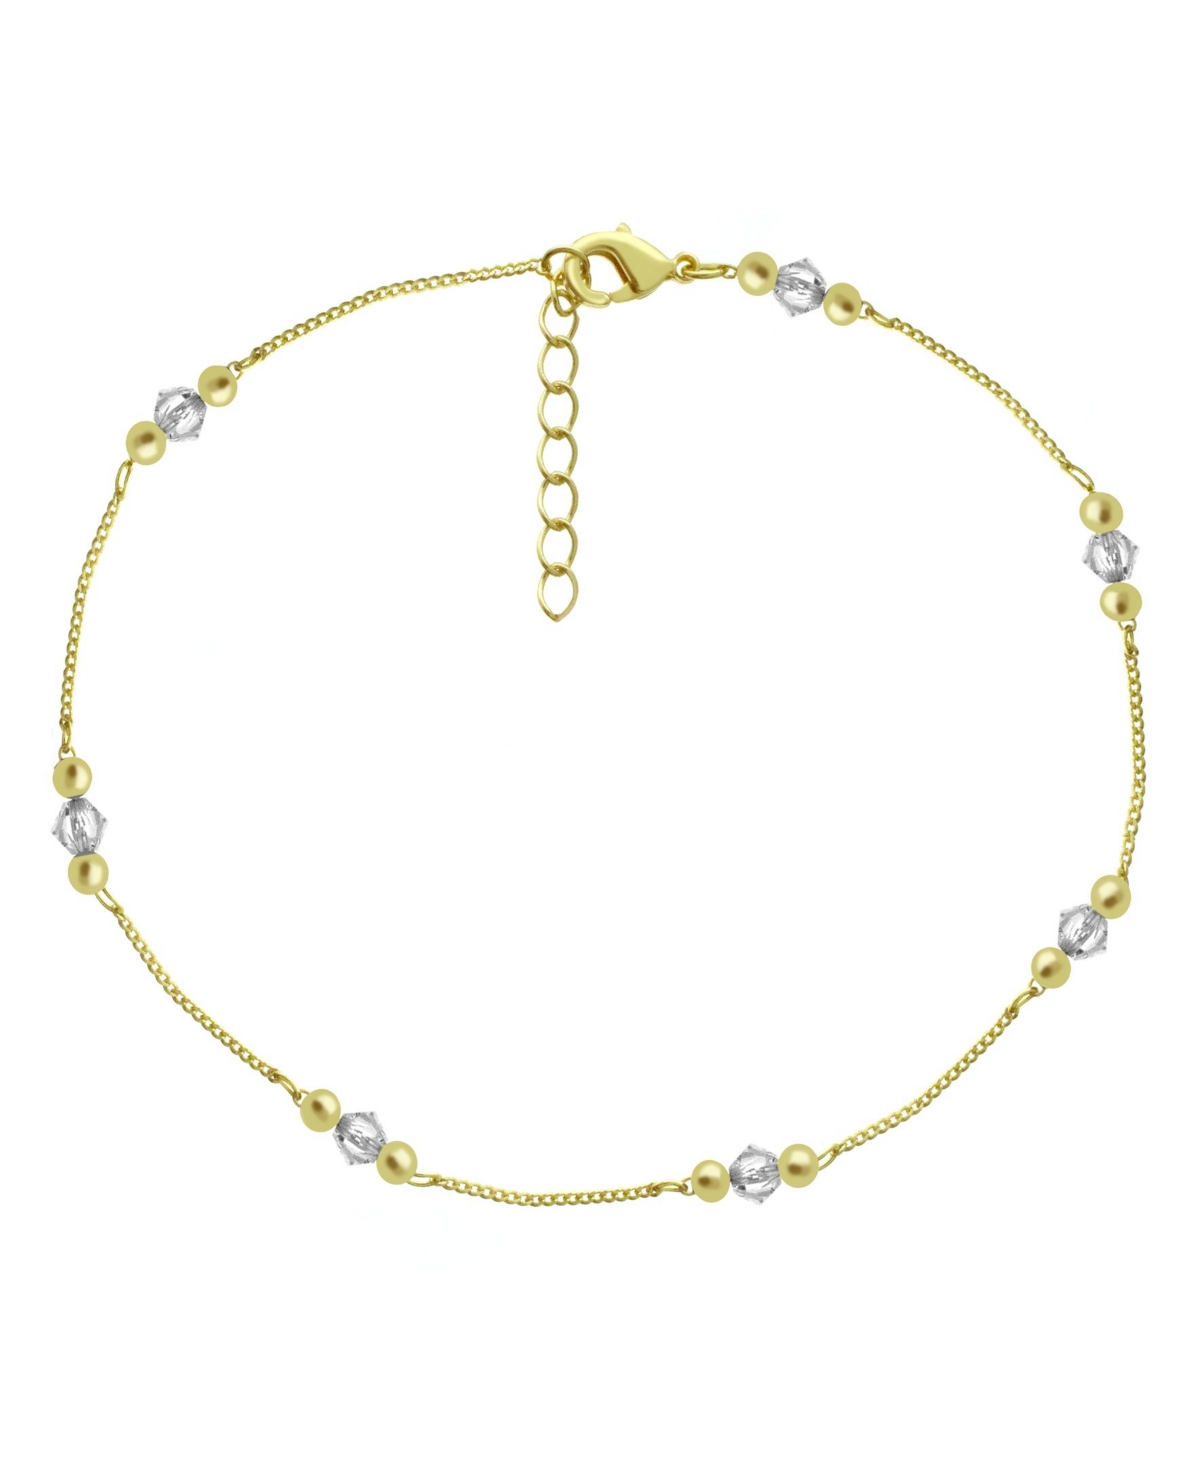 Crystal and Round Bead Chain Anklet in Gold Plate - Gold